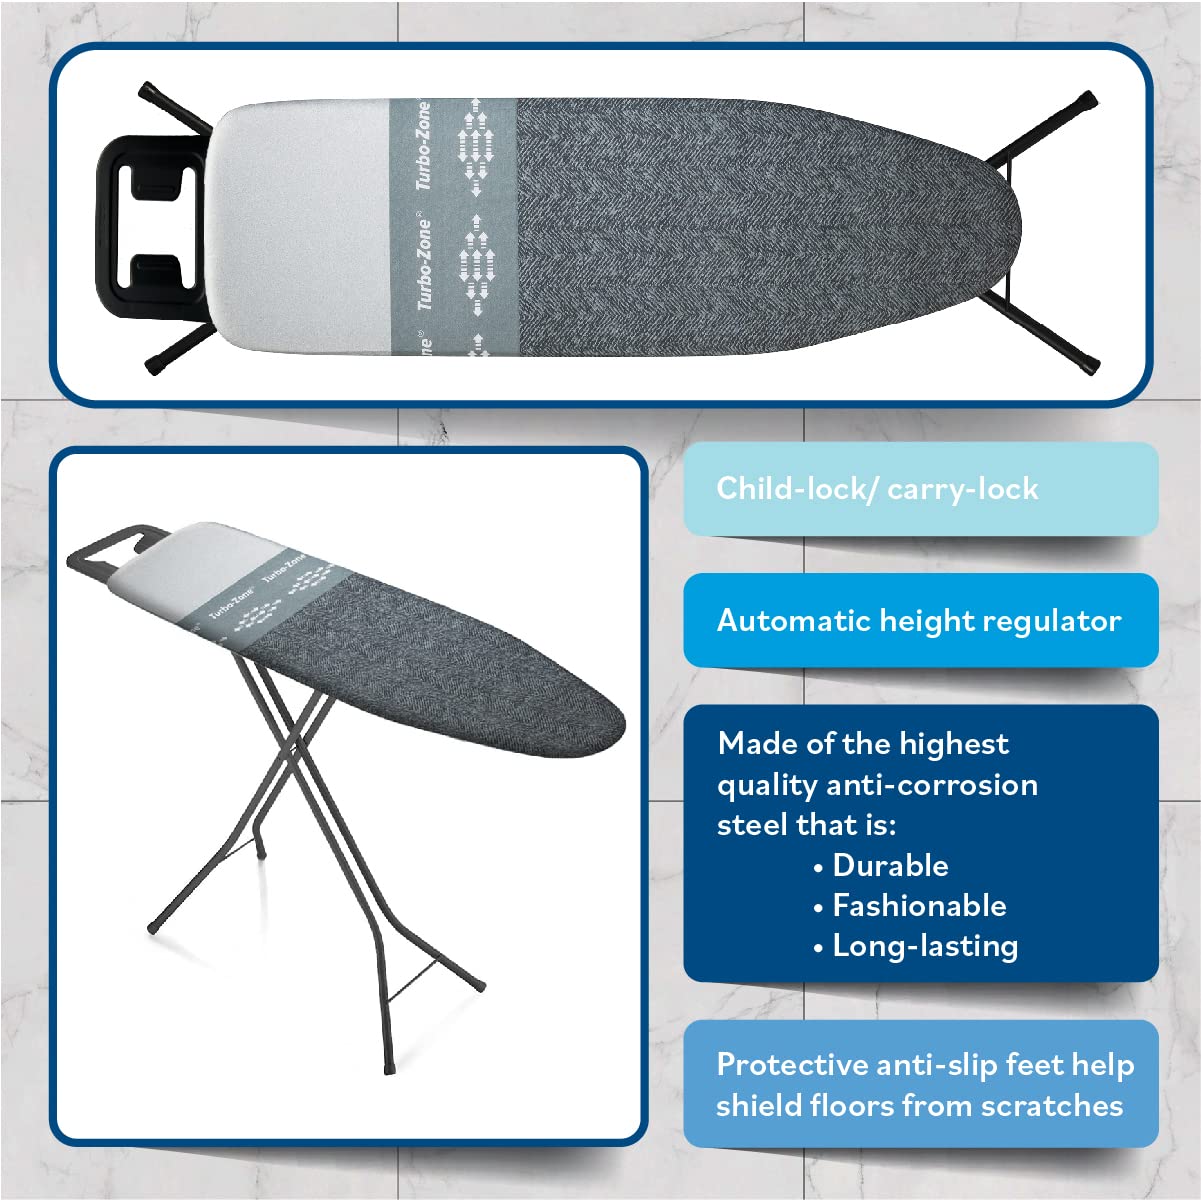 Bartnelli Classic Ironing Board with New Patent Technology | Made in Europe Iron Board with Patent Fast-Glide Zone, 4 Layer Cover & Pad, Height Adjustable, Safety Iron Rest, 4 Premium Steel Legs